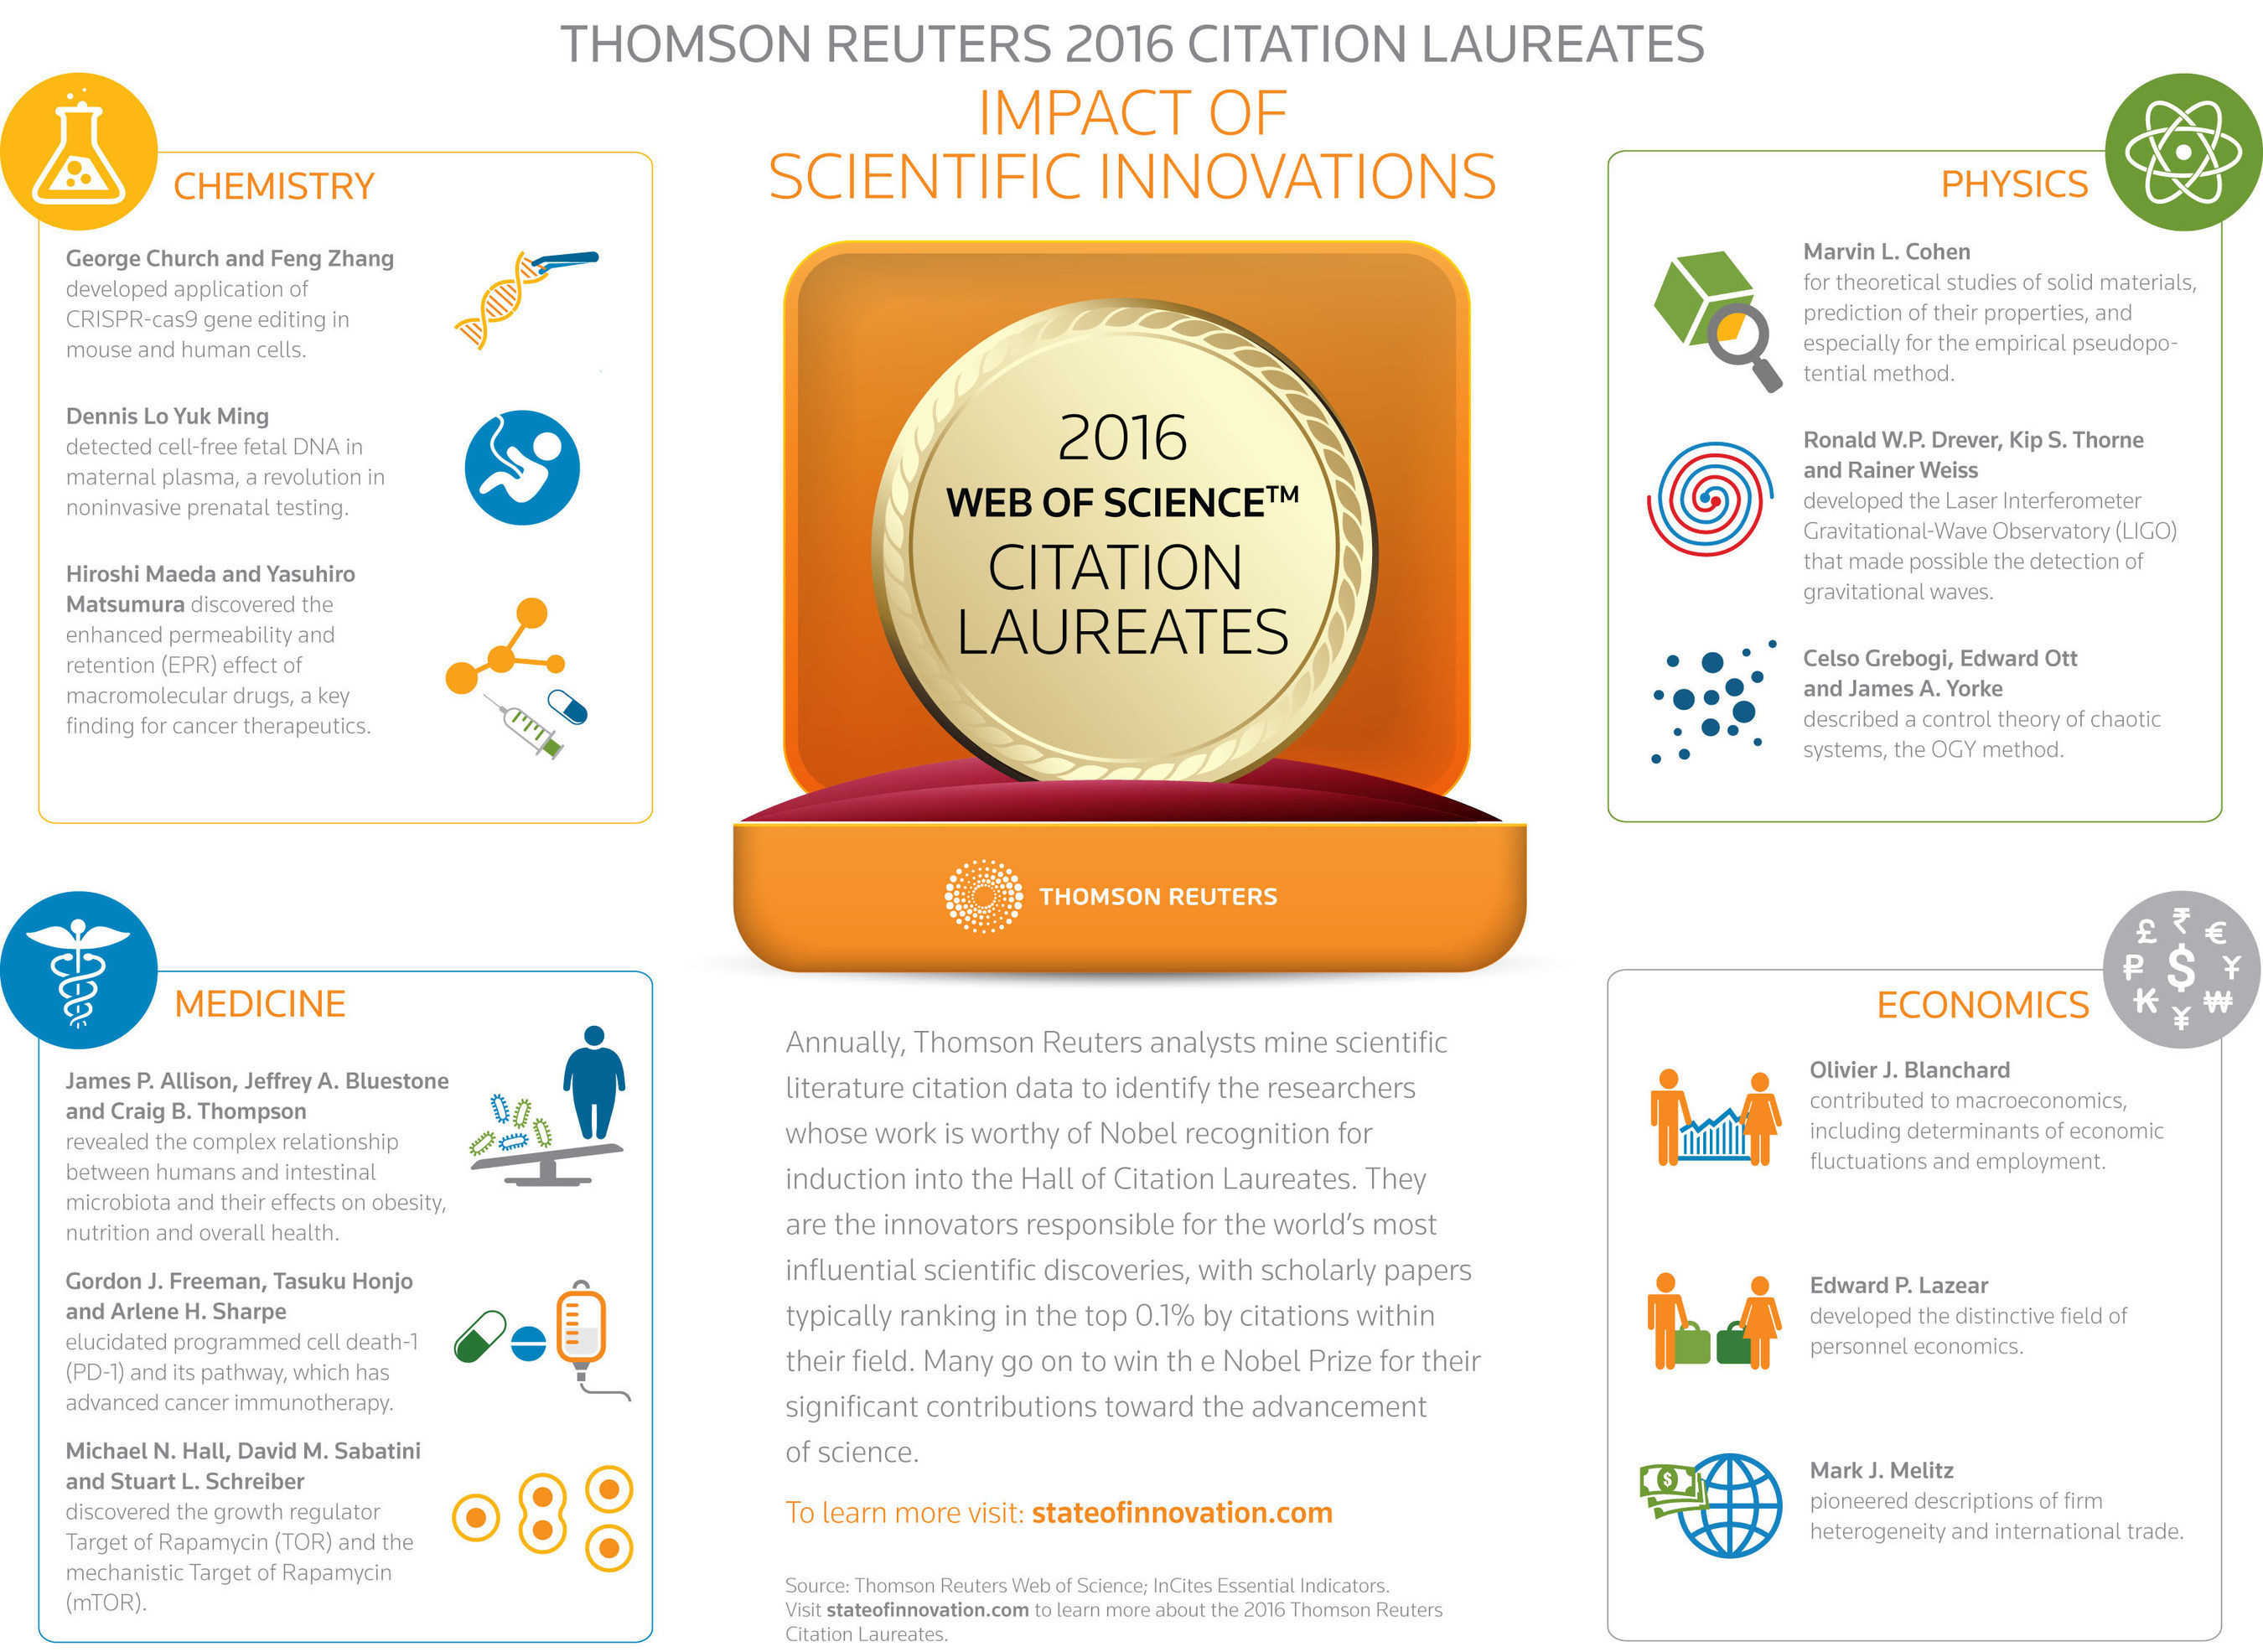 Thomson Reuters announces the 2016 Citation Laureates, candidates for Nobel Prizes this year. Go to stateofinnovation.com. Vote for your favorite: http://tmsnrt.rs/2cQMfPb